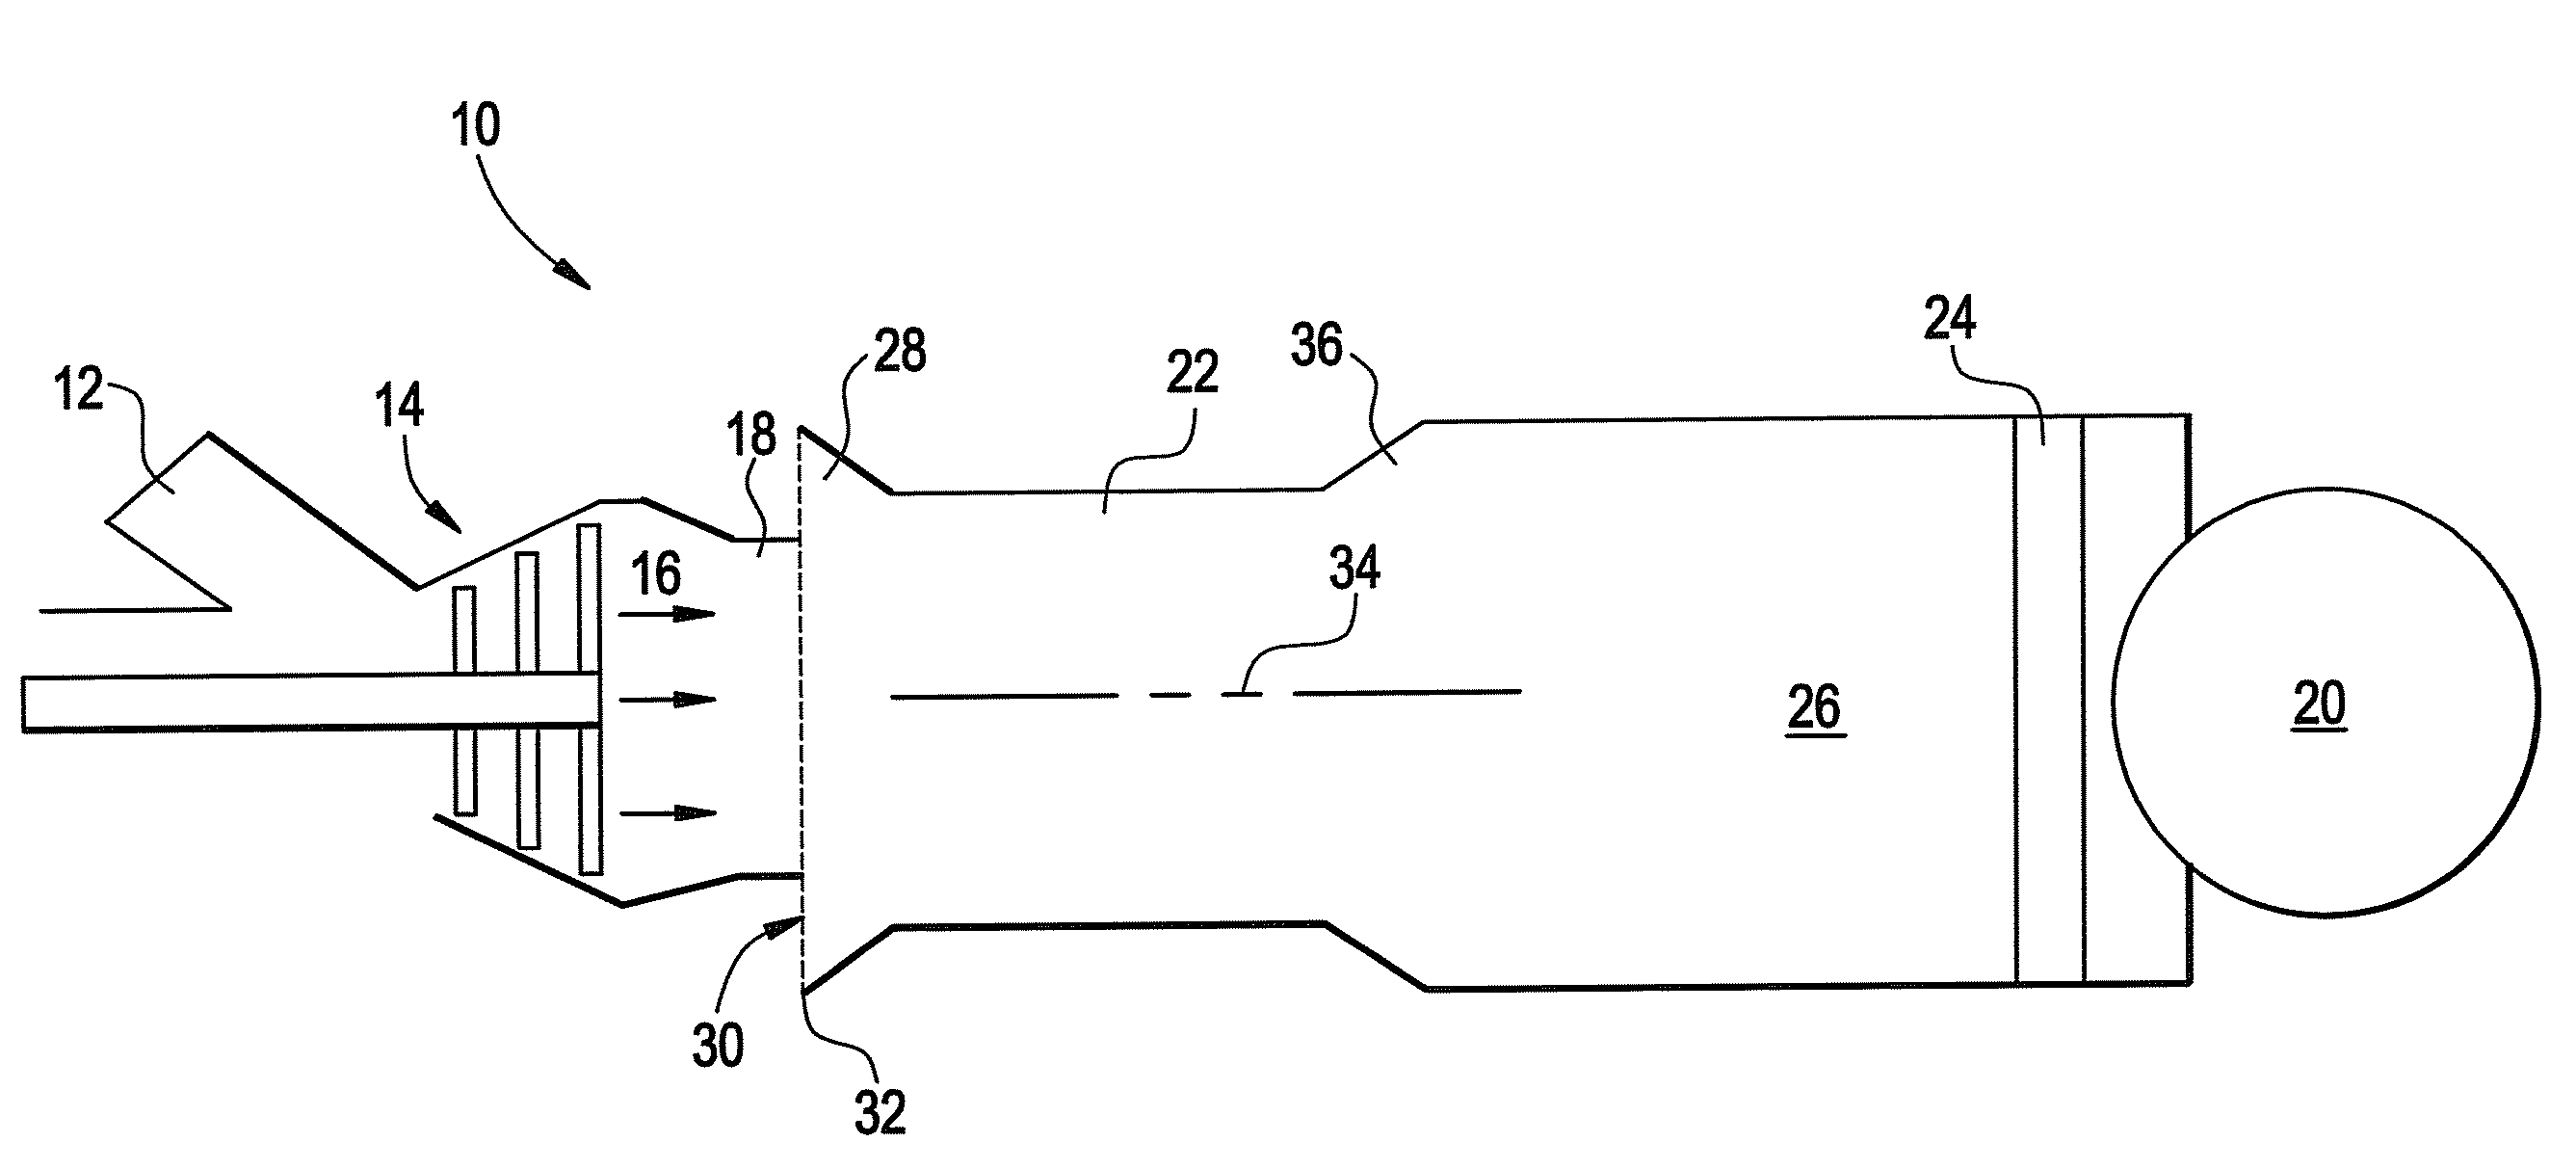 Apparatus and method for cooling turbomachine exhaust gas